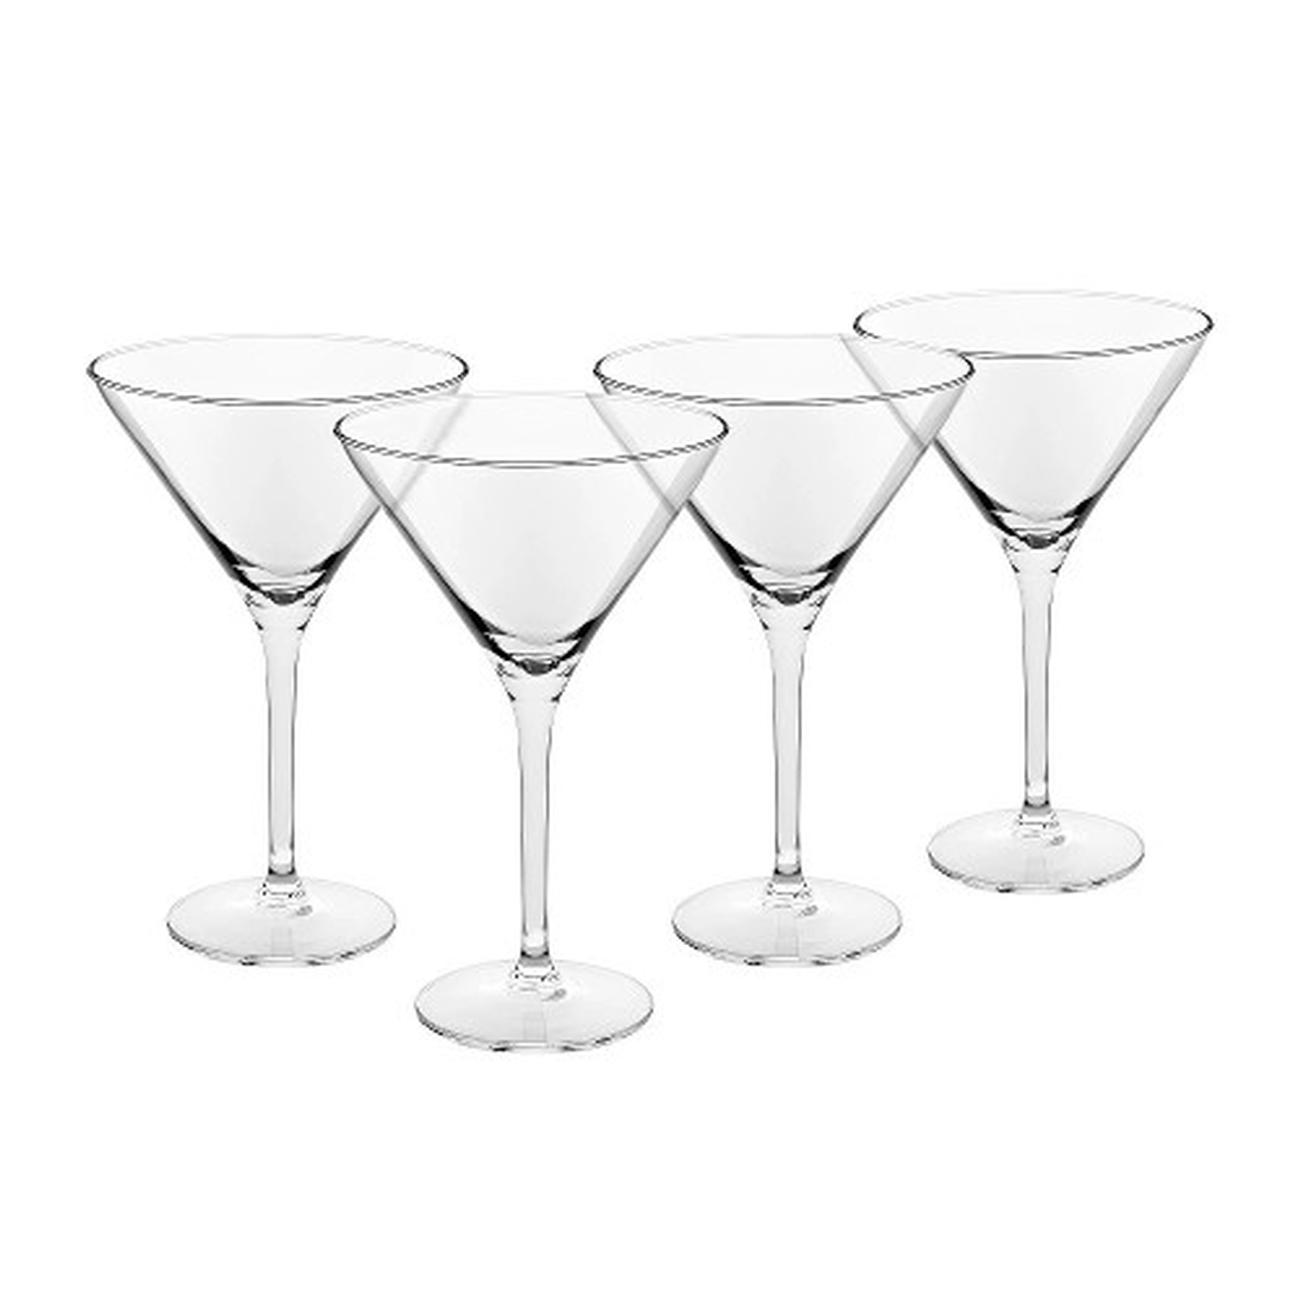 https://www.thekitchenwhisk.ie/contentfiles/productImages/Large/Royal-Leerdam-Cocktail-Glasses-Martini-Glass-260ml-Set-of-4.jpg